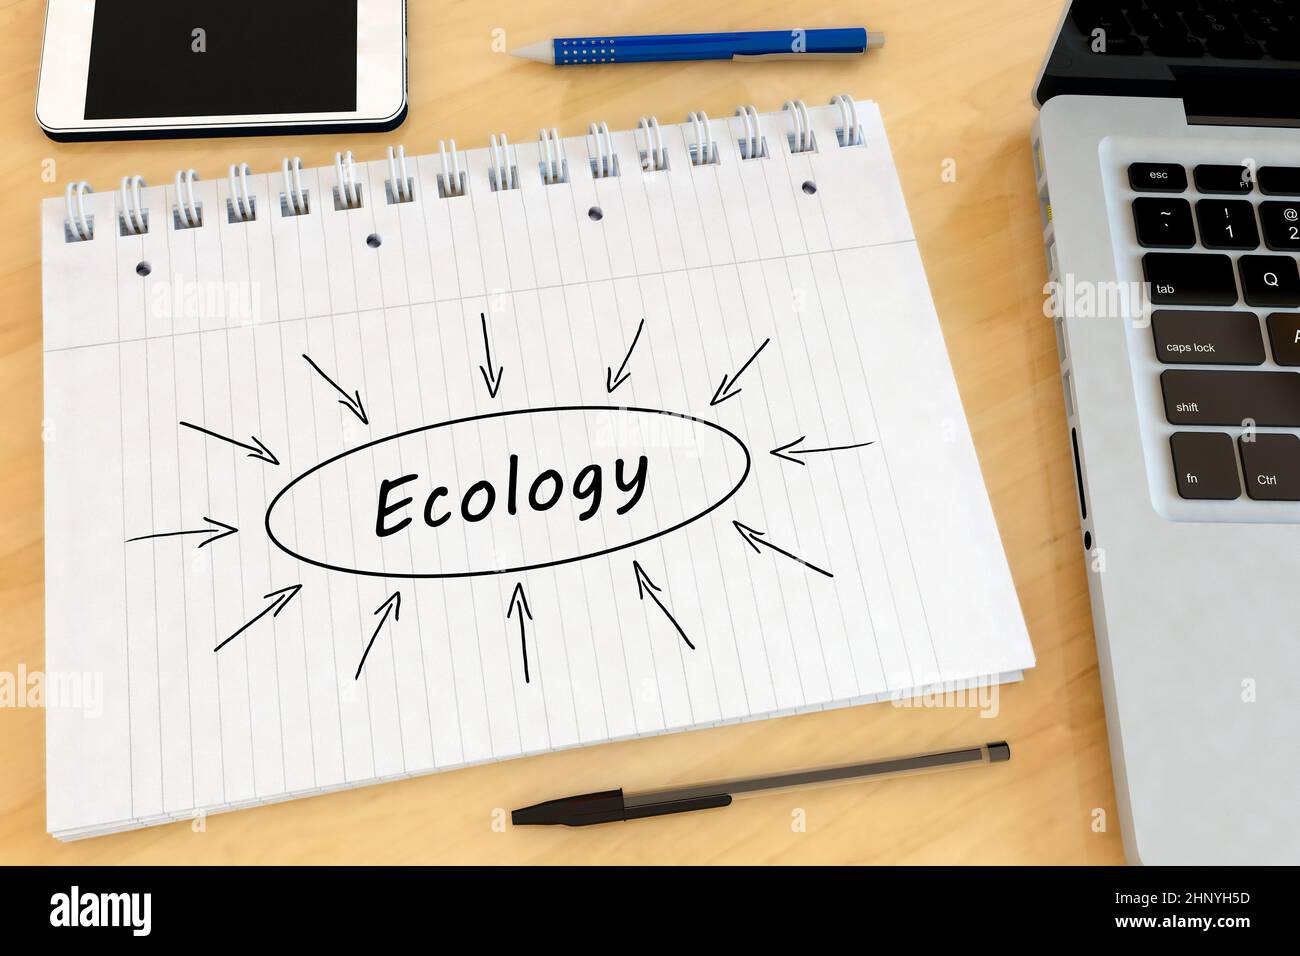 Ecology - handwritten text in a notebook on a desk - 3d render illustration. Stock Photo